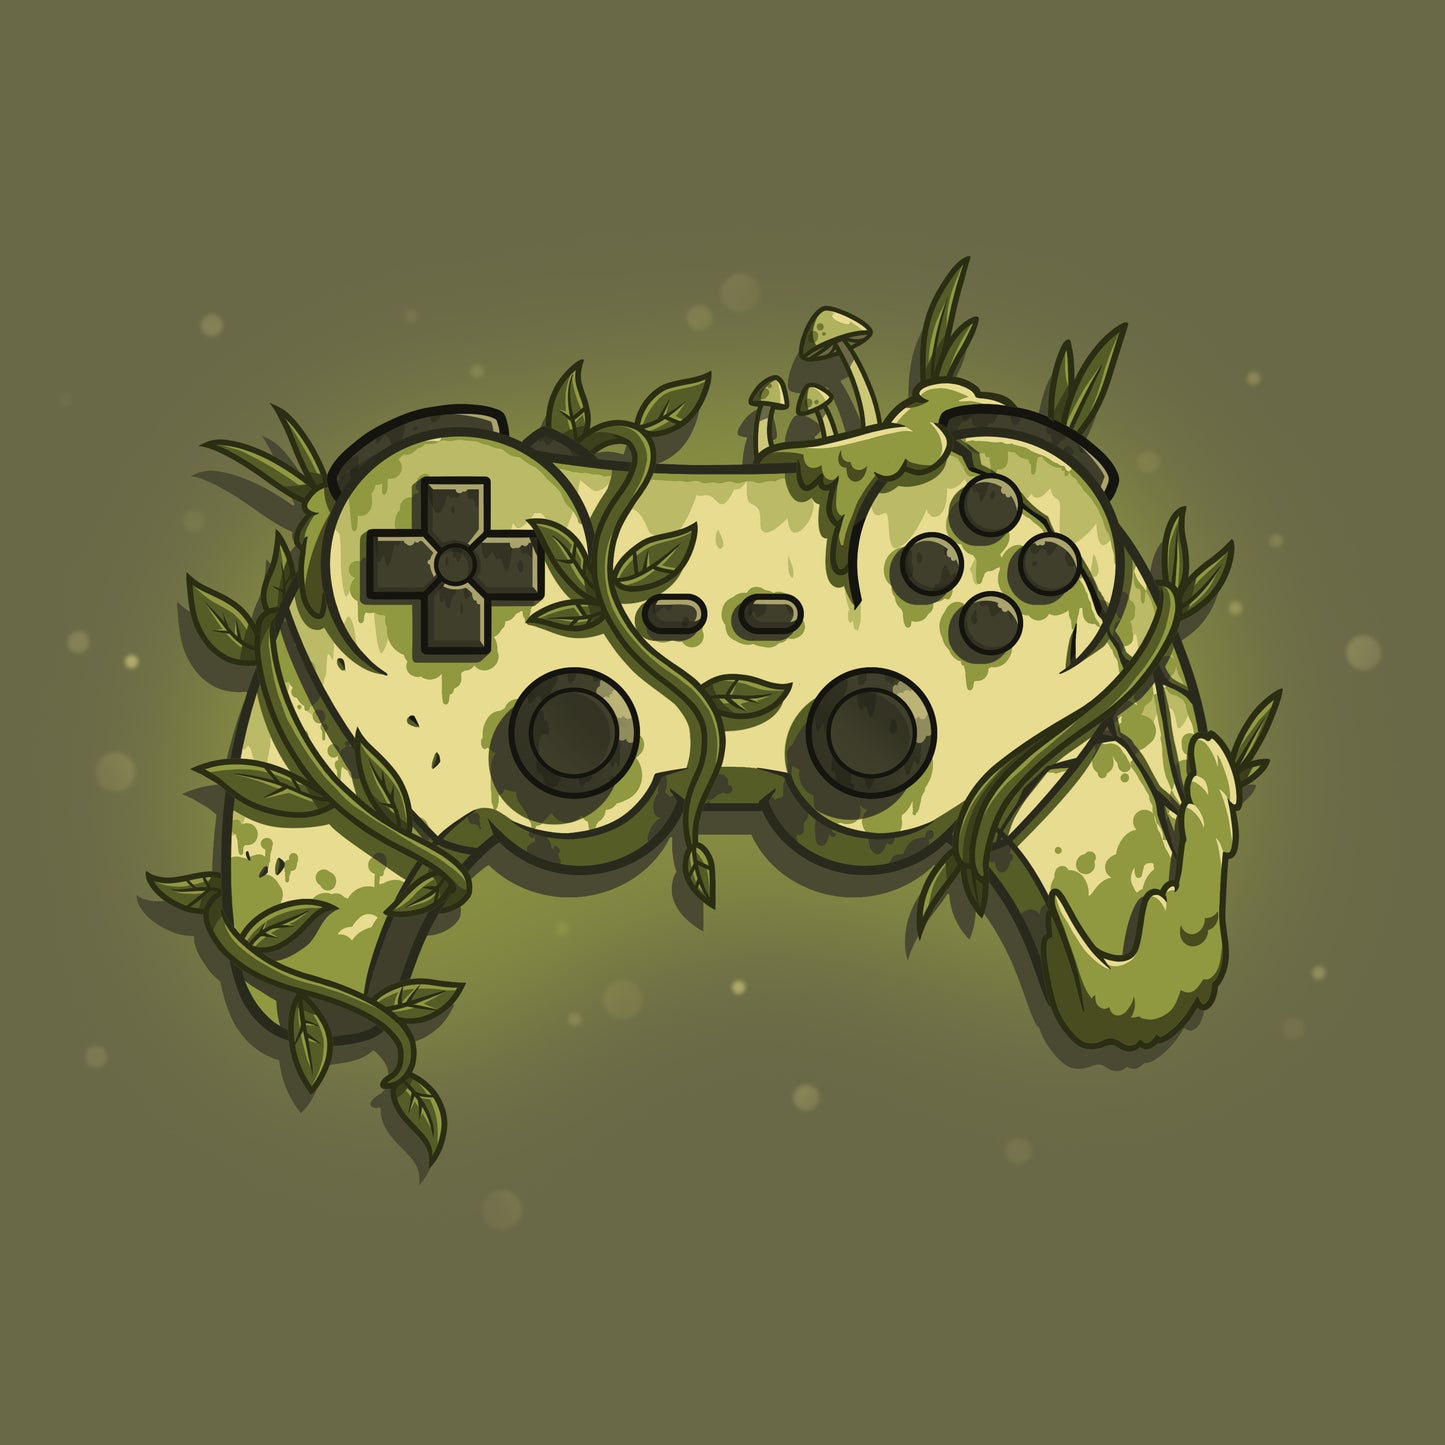 A Overgrown Controller by TeeTurtle, with nature-inspired leaves on a military green background.